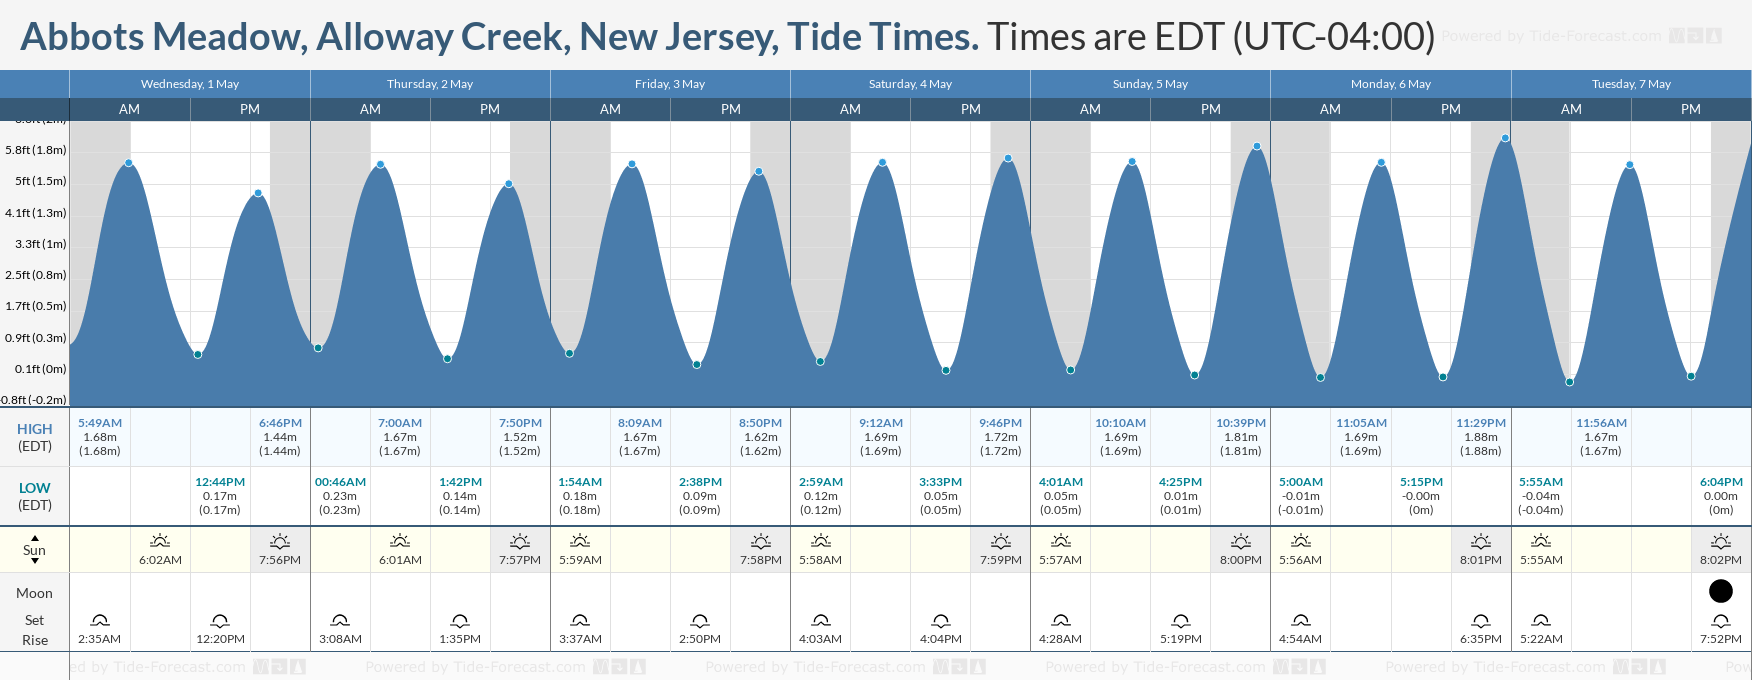 Abbots Meadow, Alloway Creek, New Jersey Tide Chart including high and low tide tide times for the next 7 days